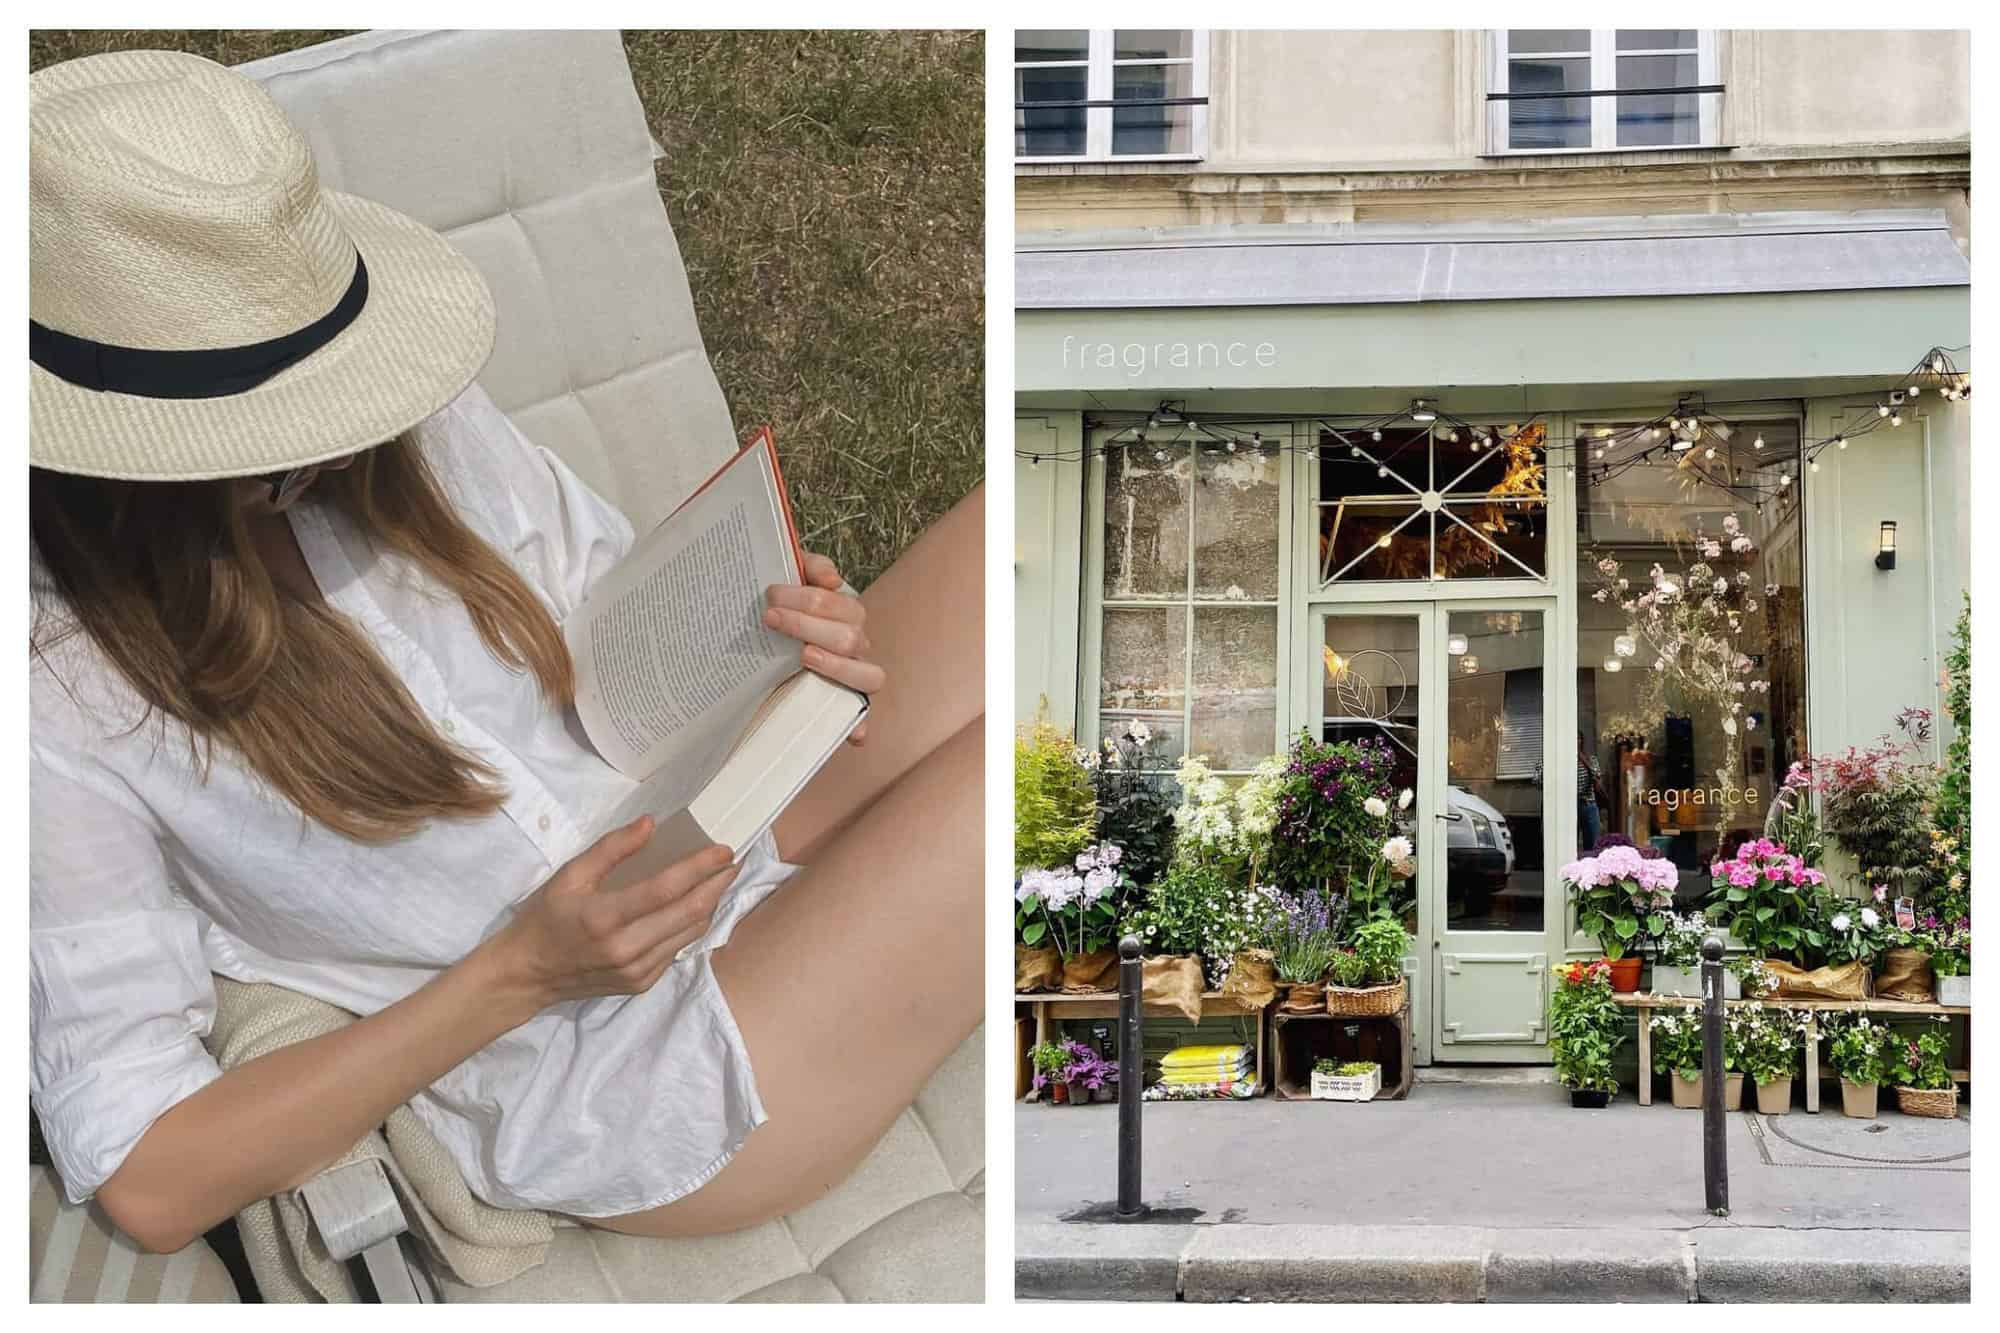 Left: woman sitting in a chair in a white linen button-up shirt reading a book with her head covered by a sun hat, Right: Paris flower shop